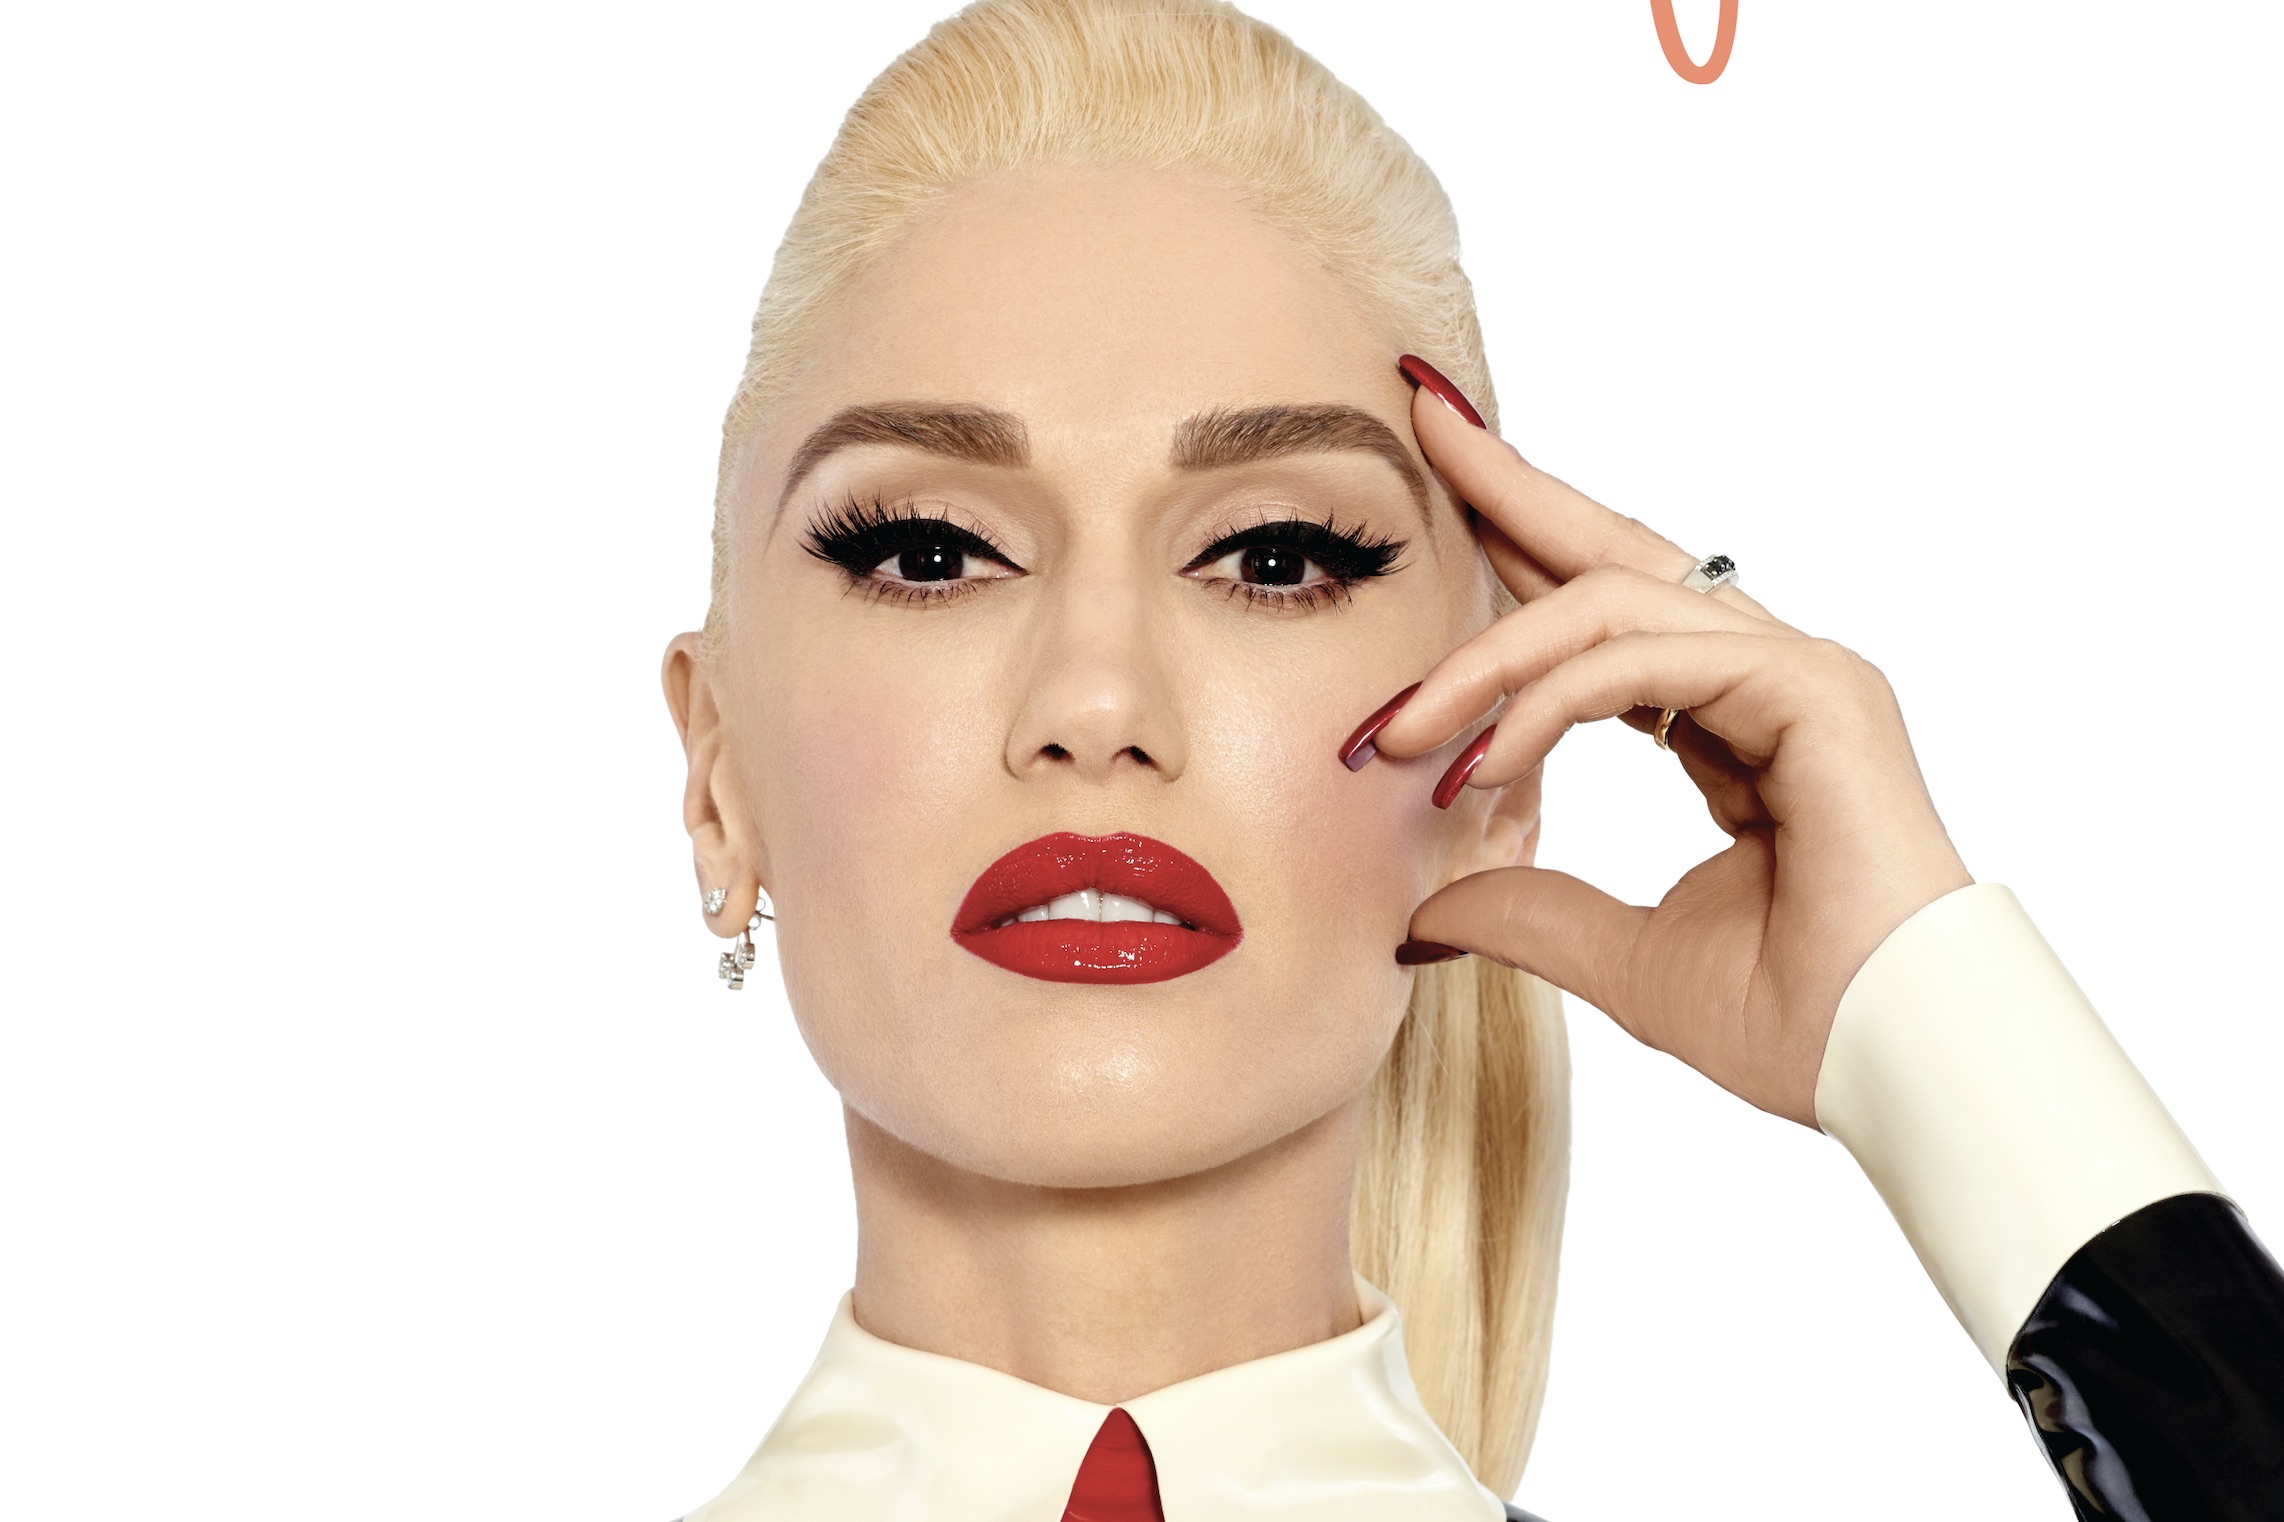 Gwen Stefani will perform a one-night-only show at the Central Harbourfront event space timed to coincide with this year’s Hong Kong Rugby Sevens tournament. Photo via Marriott Bonvoy. 